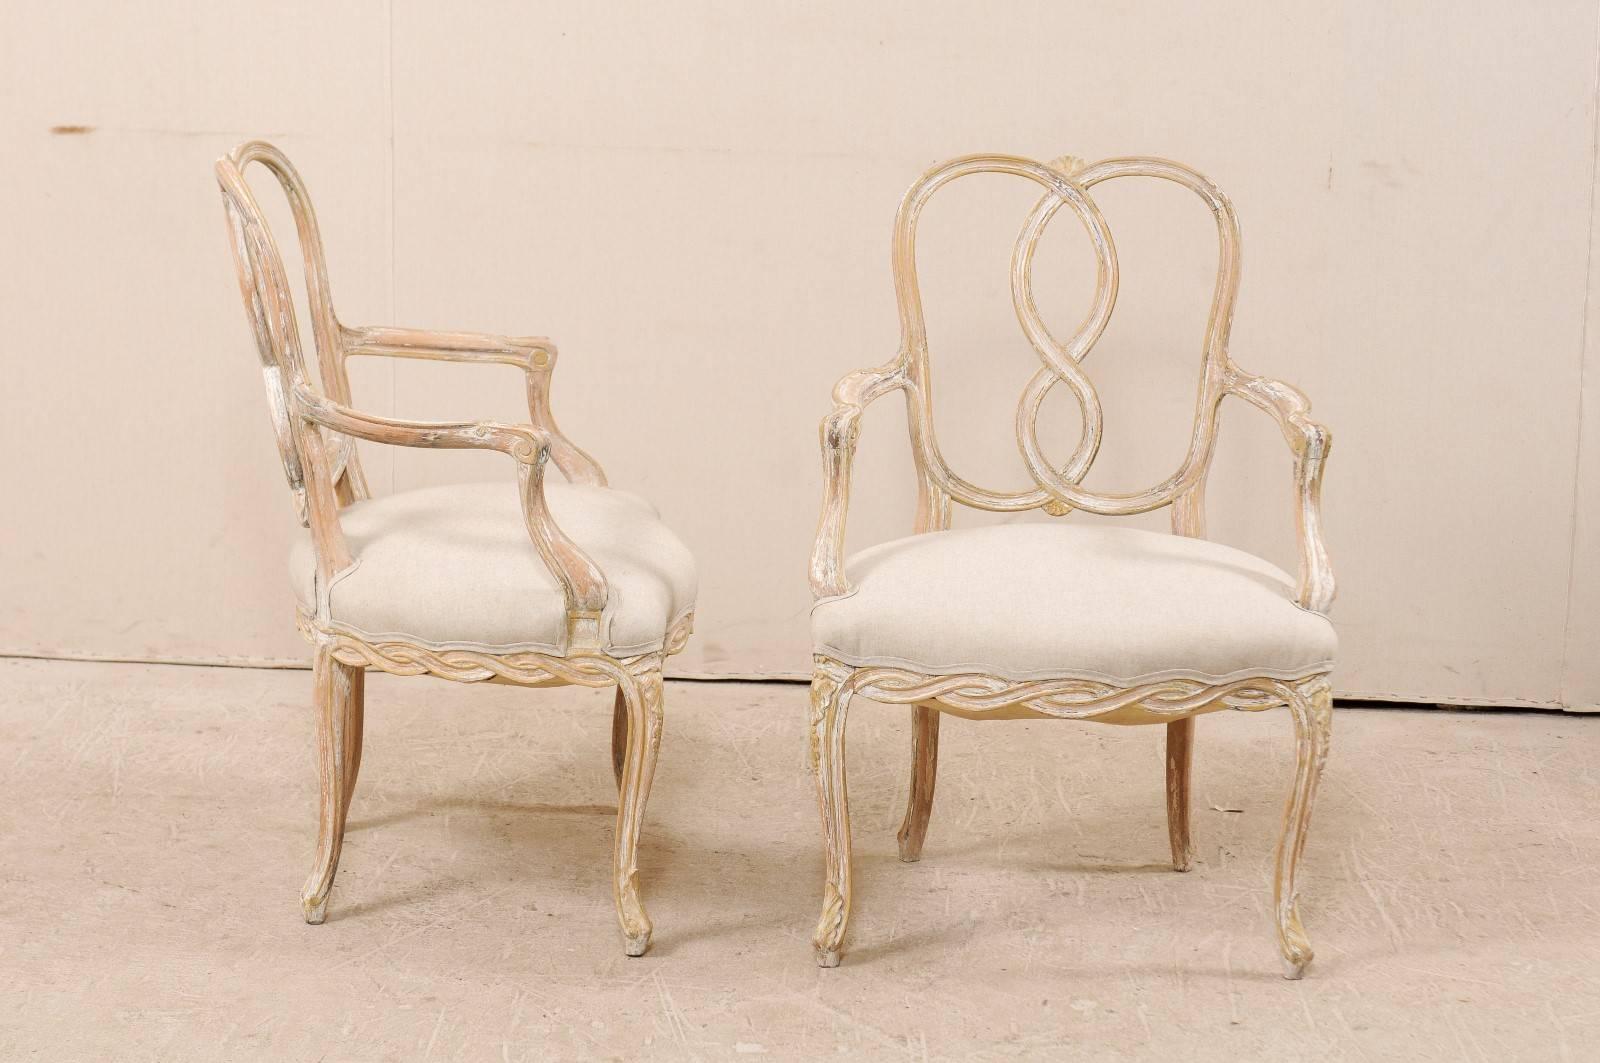 American Pair of Venetian Style Ribbon Back Chairs with Cabriole Legs in Nice Light Tones